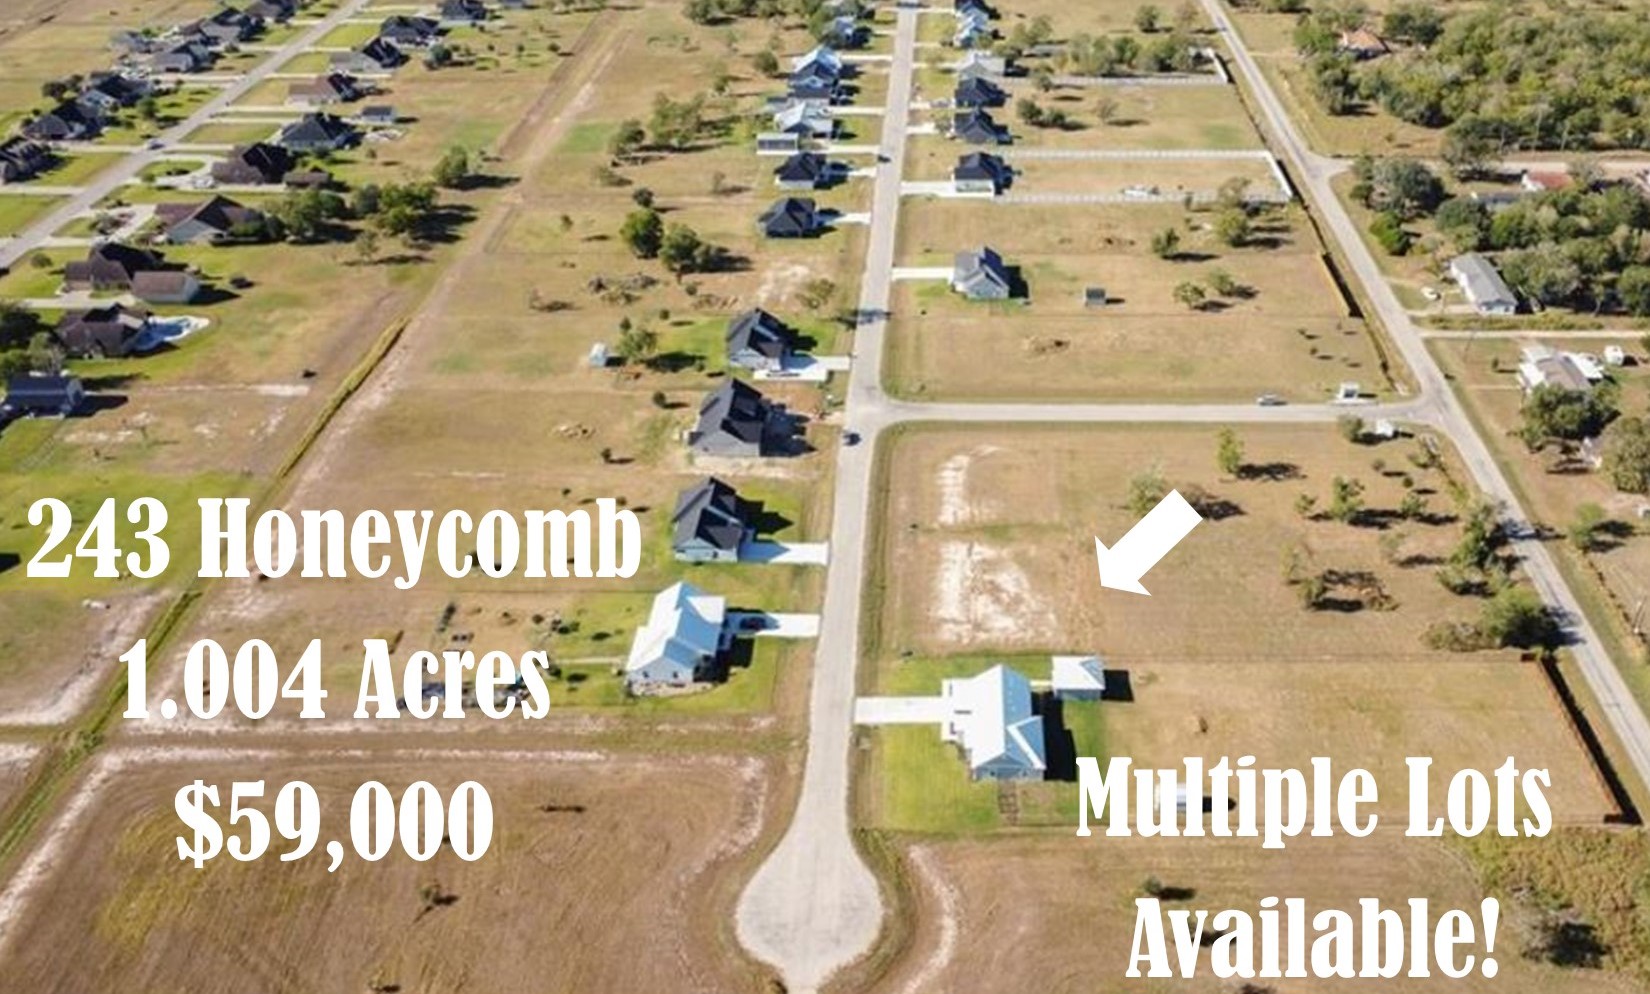 Lots for sale on Honeycomb in Victoria, TX